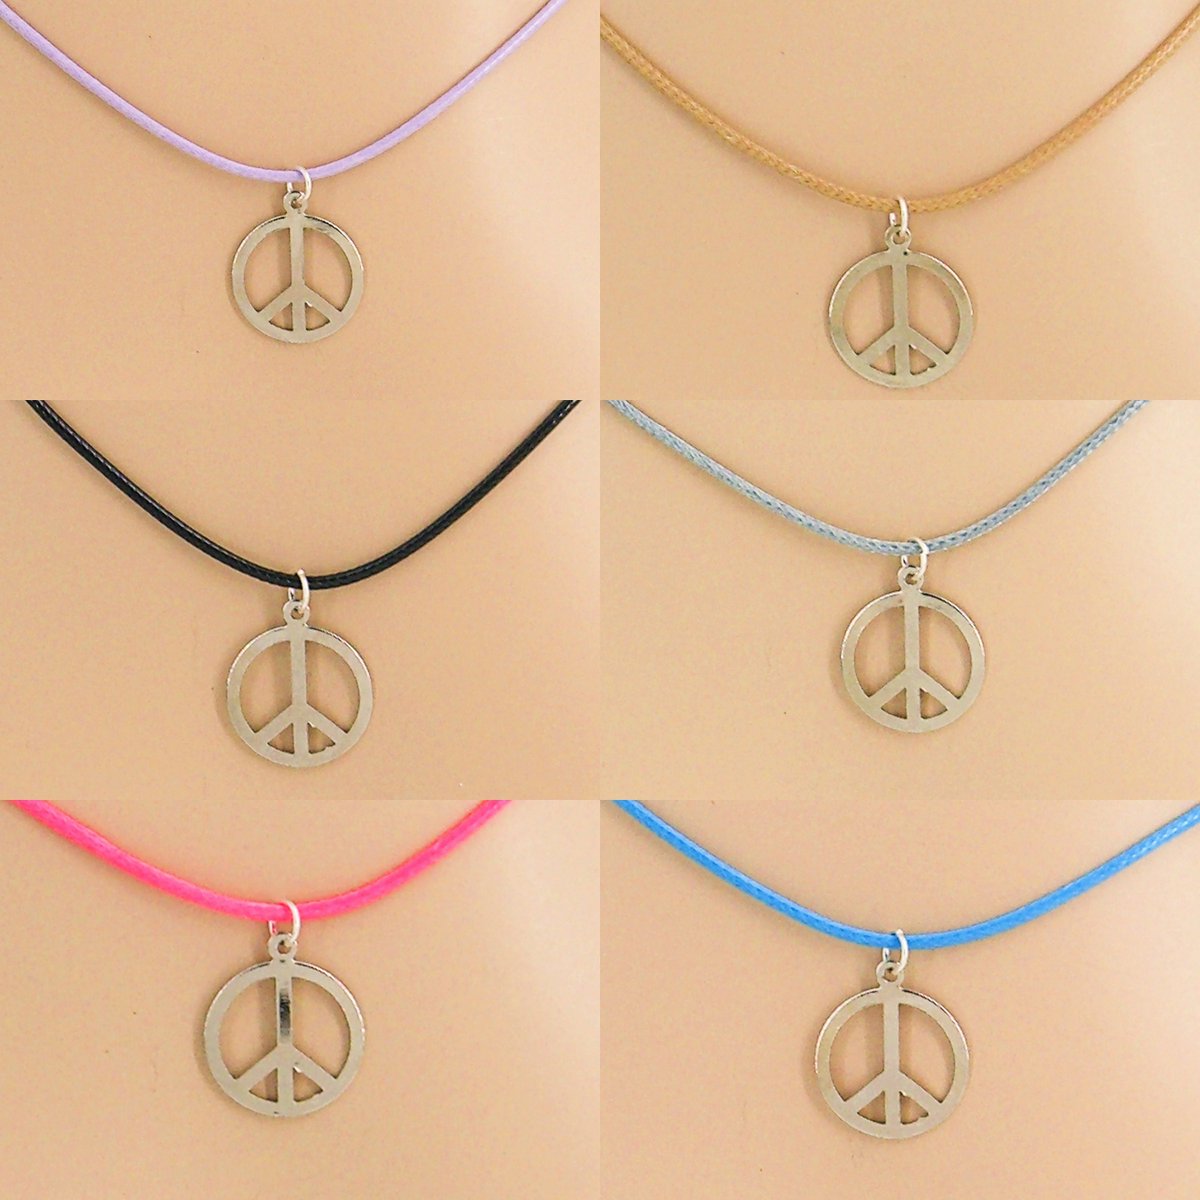 Peace Sign Necklace Choice of 6 Colors Adj 18 inches to 20 inches #surfer #NecklacePendant 
$8.50
➤ grassshacktrading.etsy.com/listing/118510…